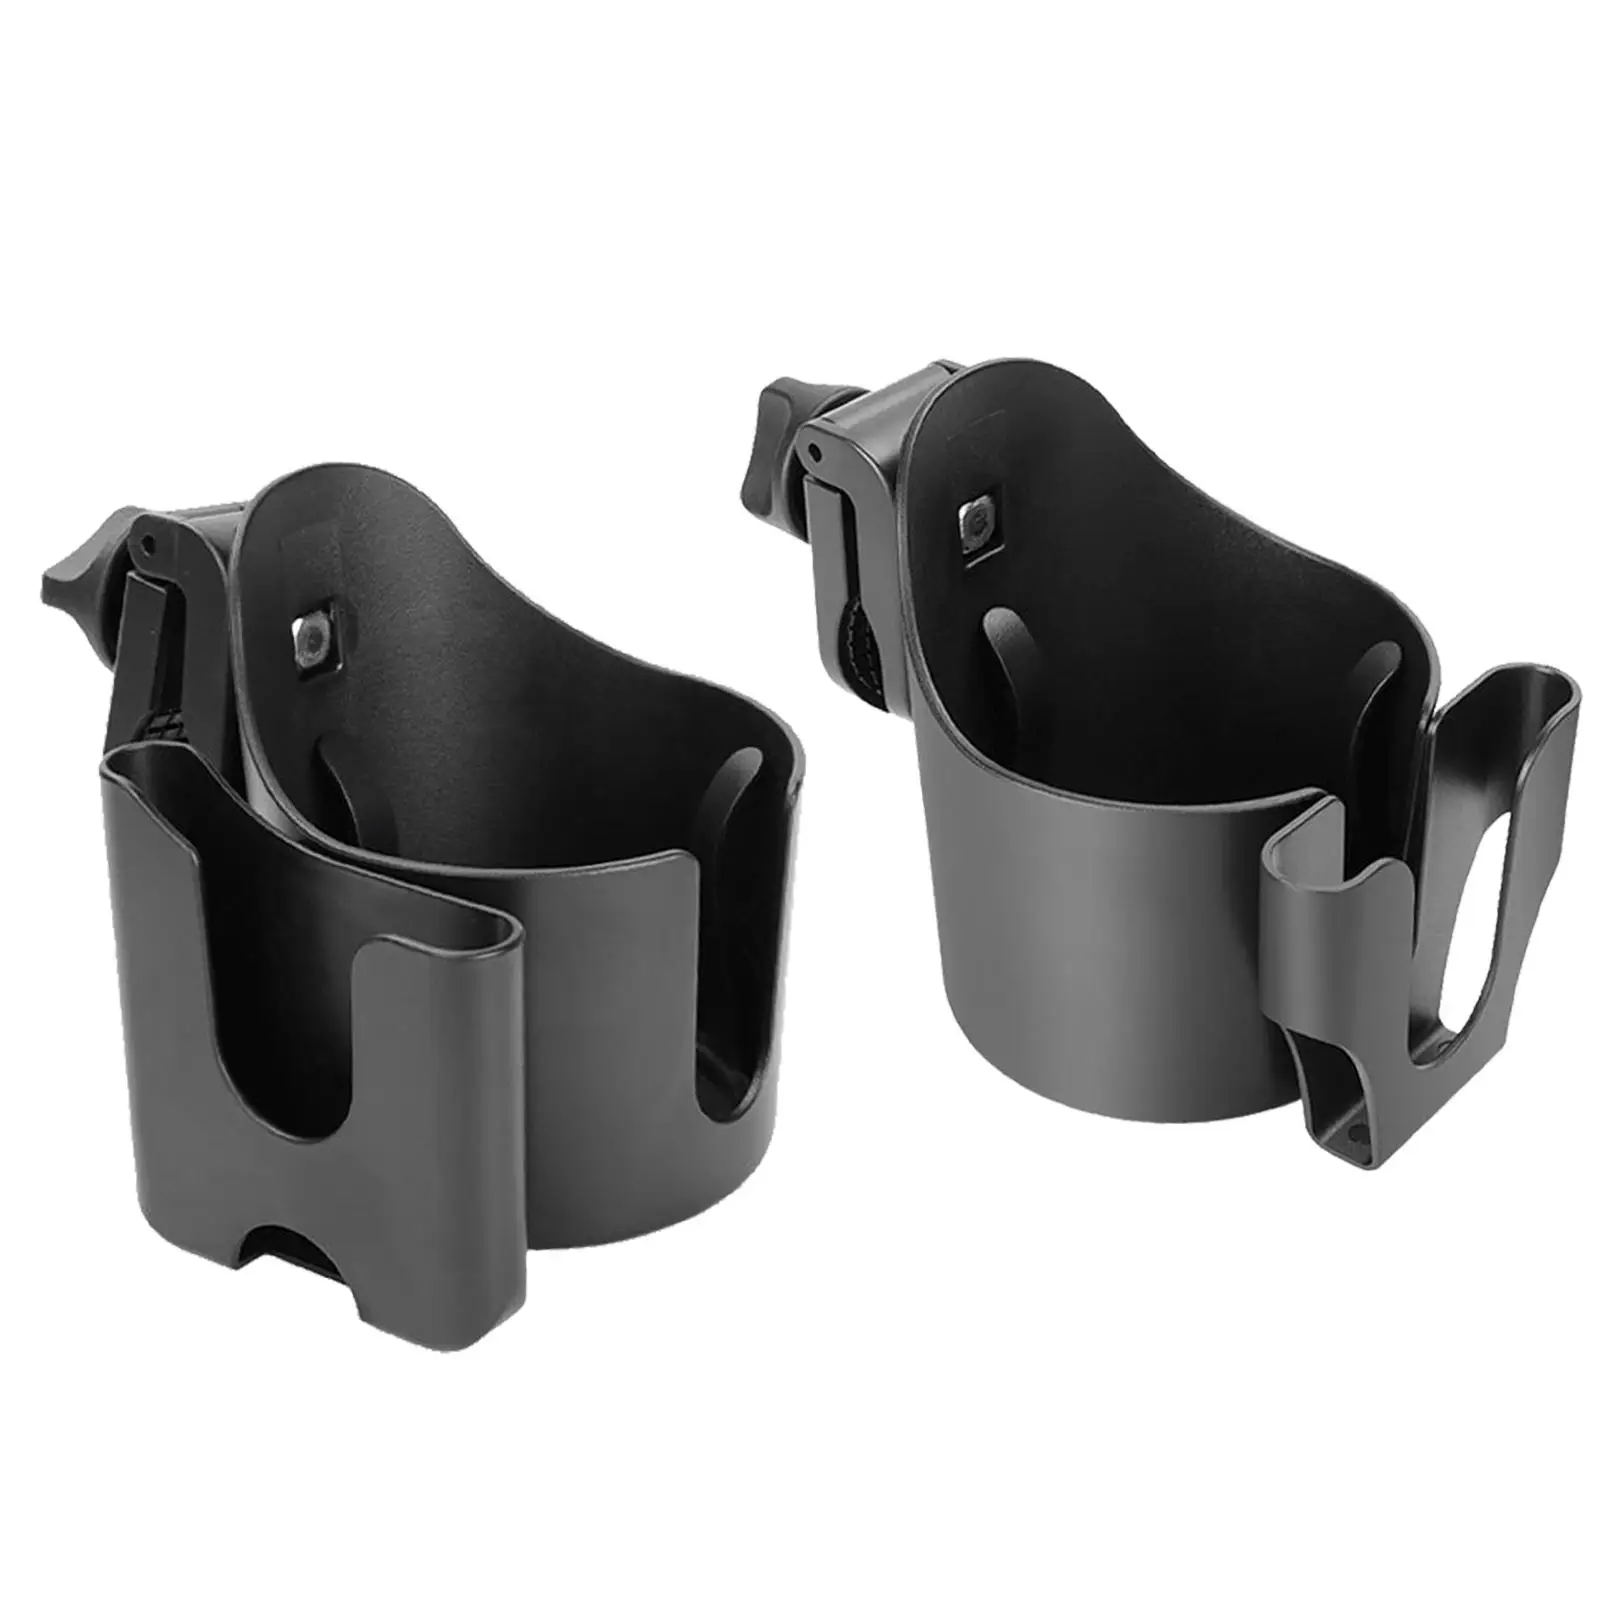 Universal Pram Cup Holder Phone Accessories, with Adjustable Clip Organizer Non Slip for Pushchair Drink Car